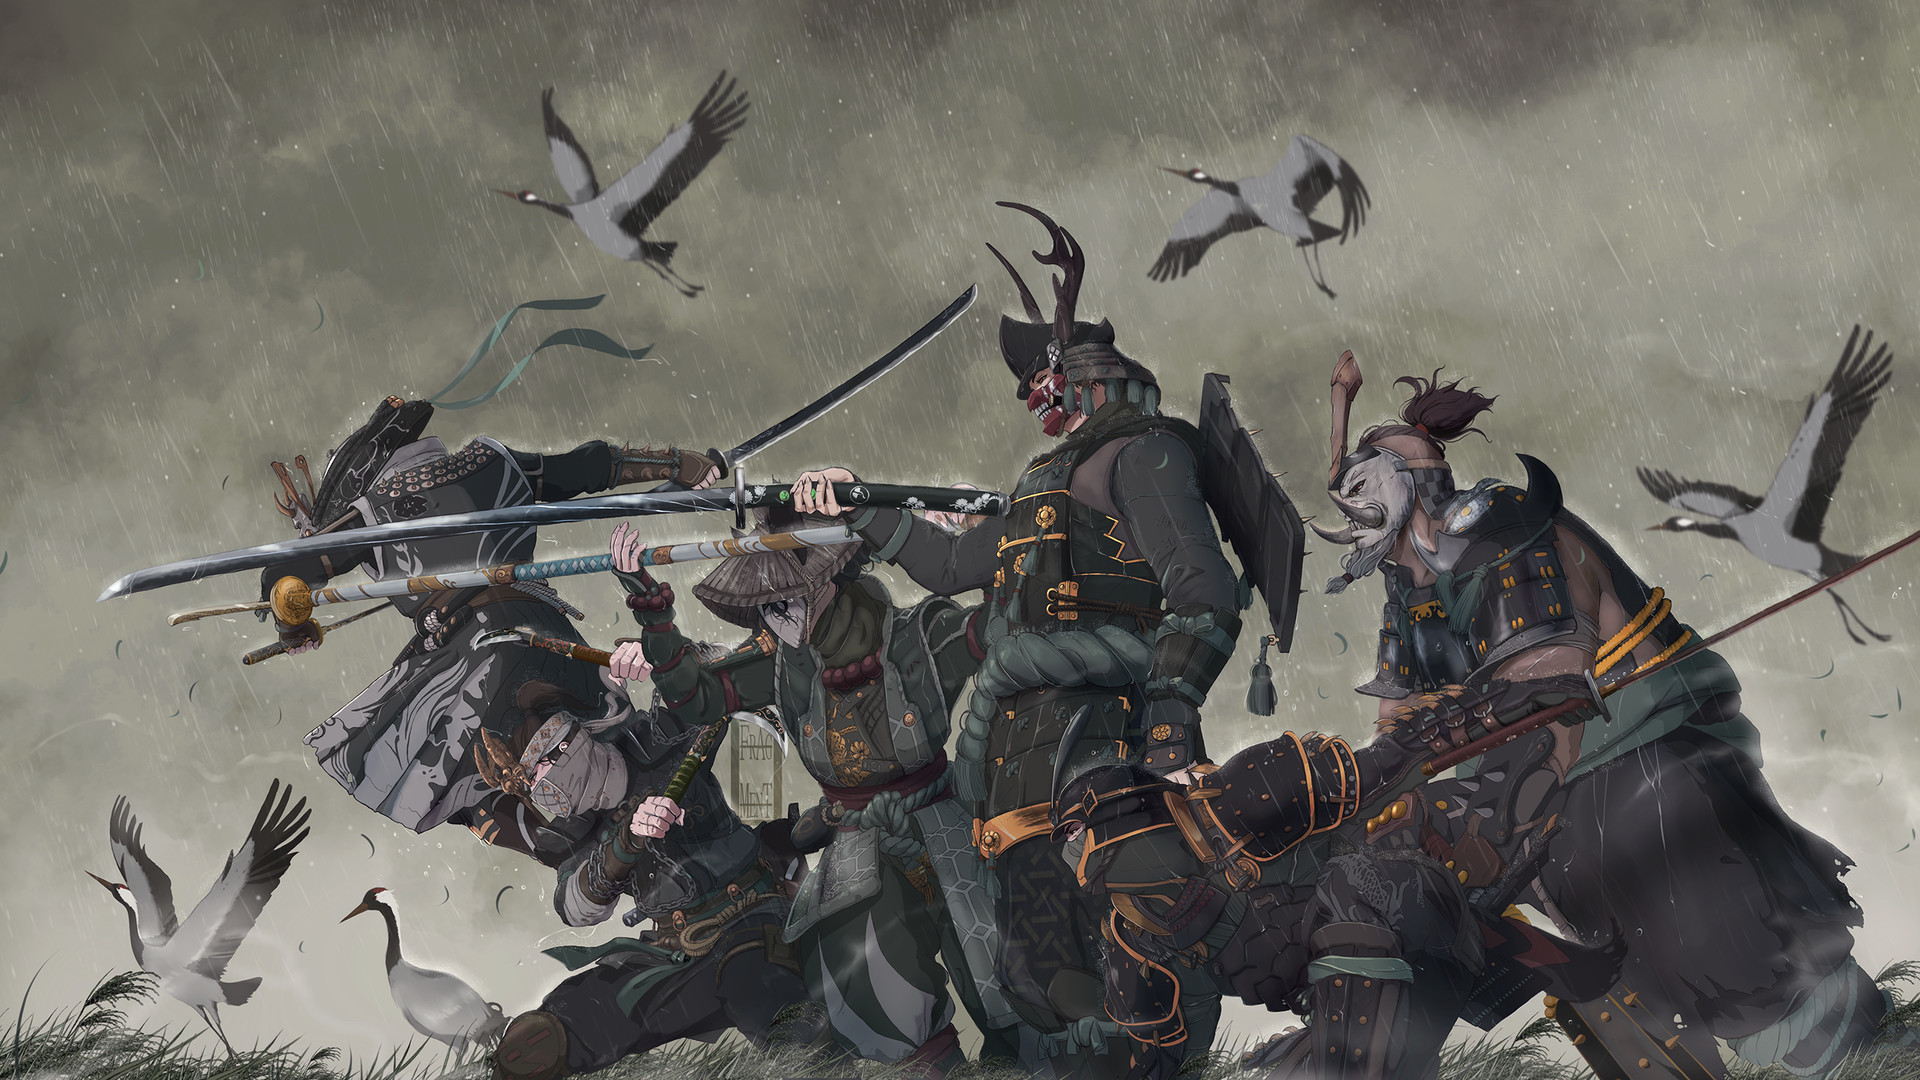 1920x1080 For Honor - The Dance of the Cranes